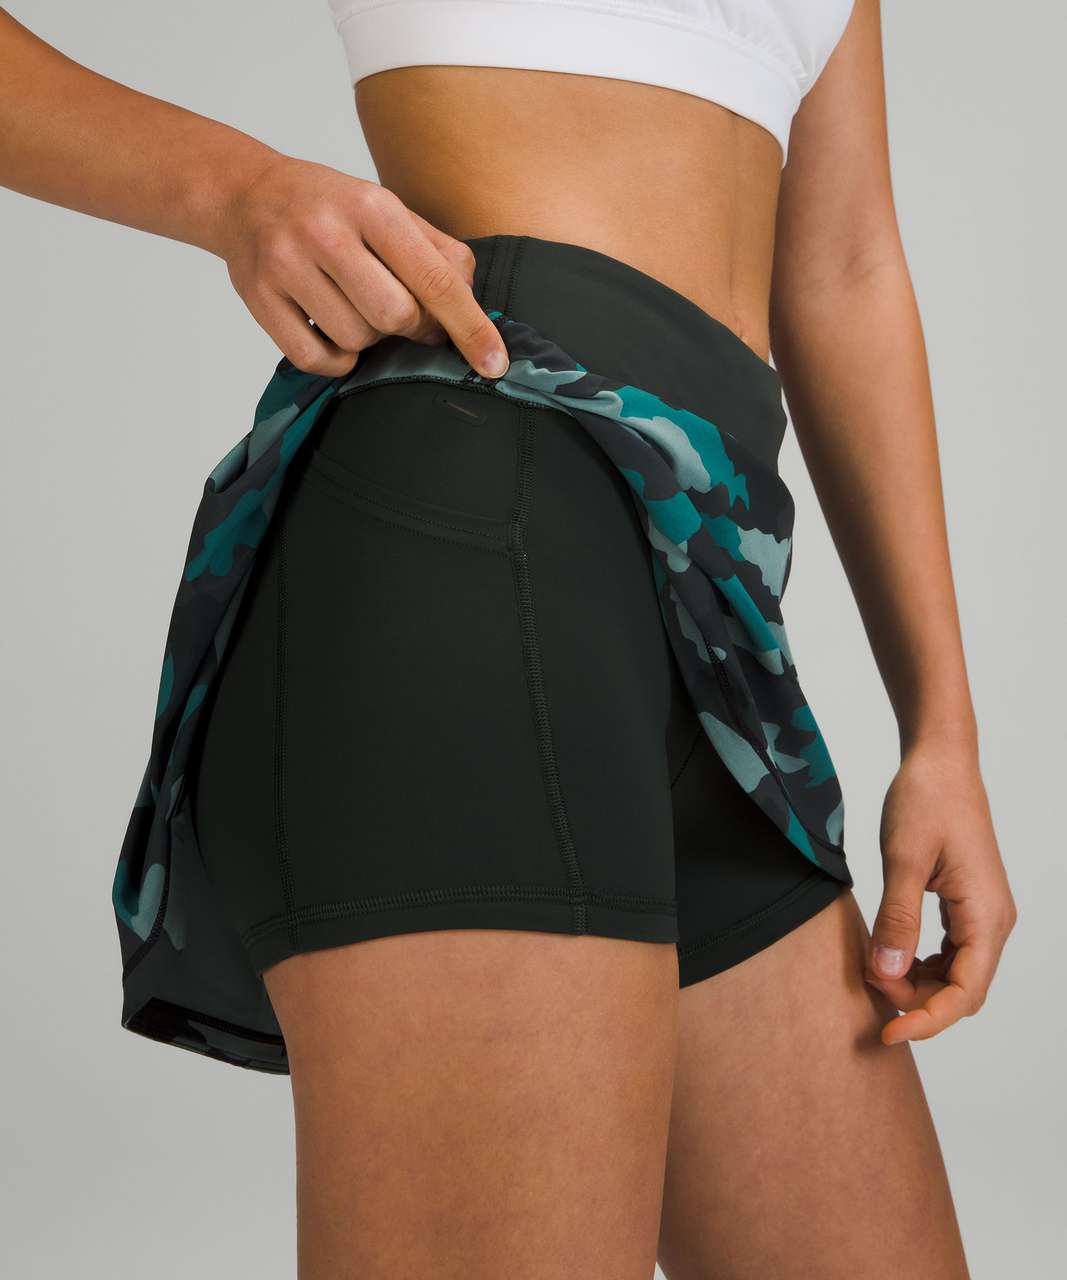 Lululemon Pace Rival Mid-Rise Skirt - Heritage 365 Camo Tidewater Teal Multi / Rainforest Green